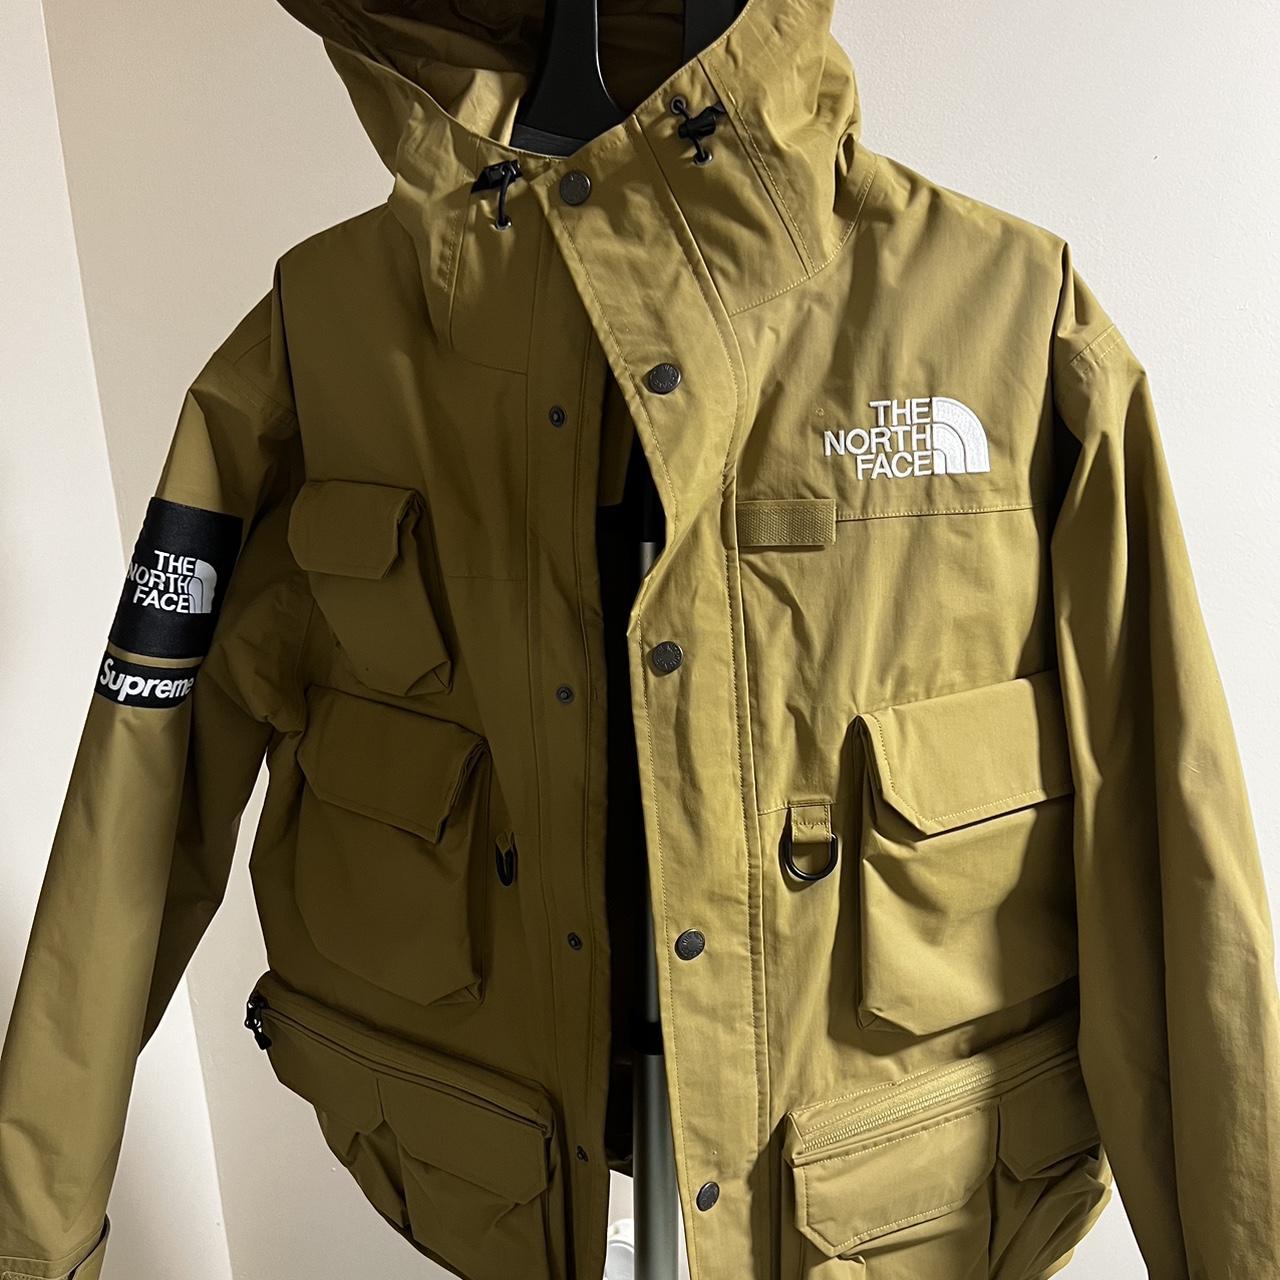 North face x supreme cargo jacket with hood., Worn...